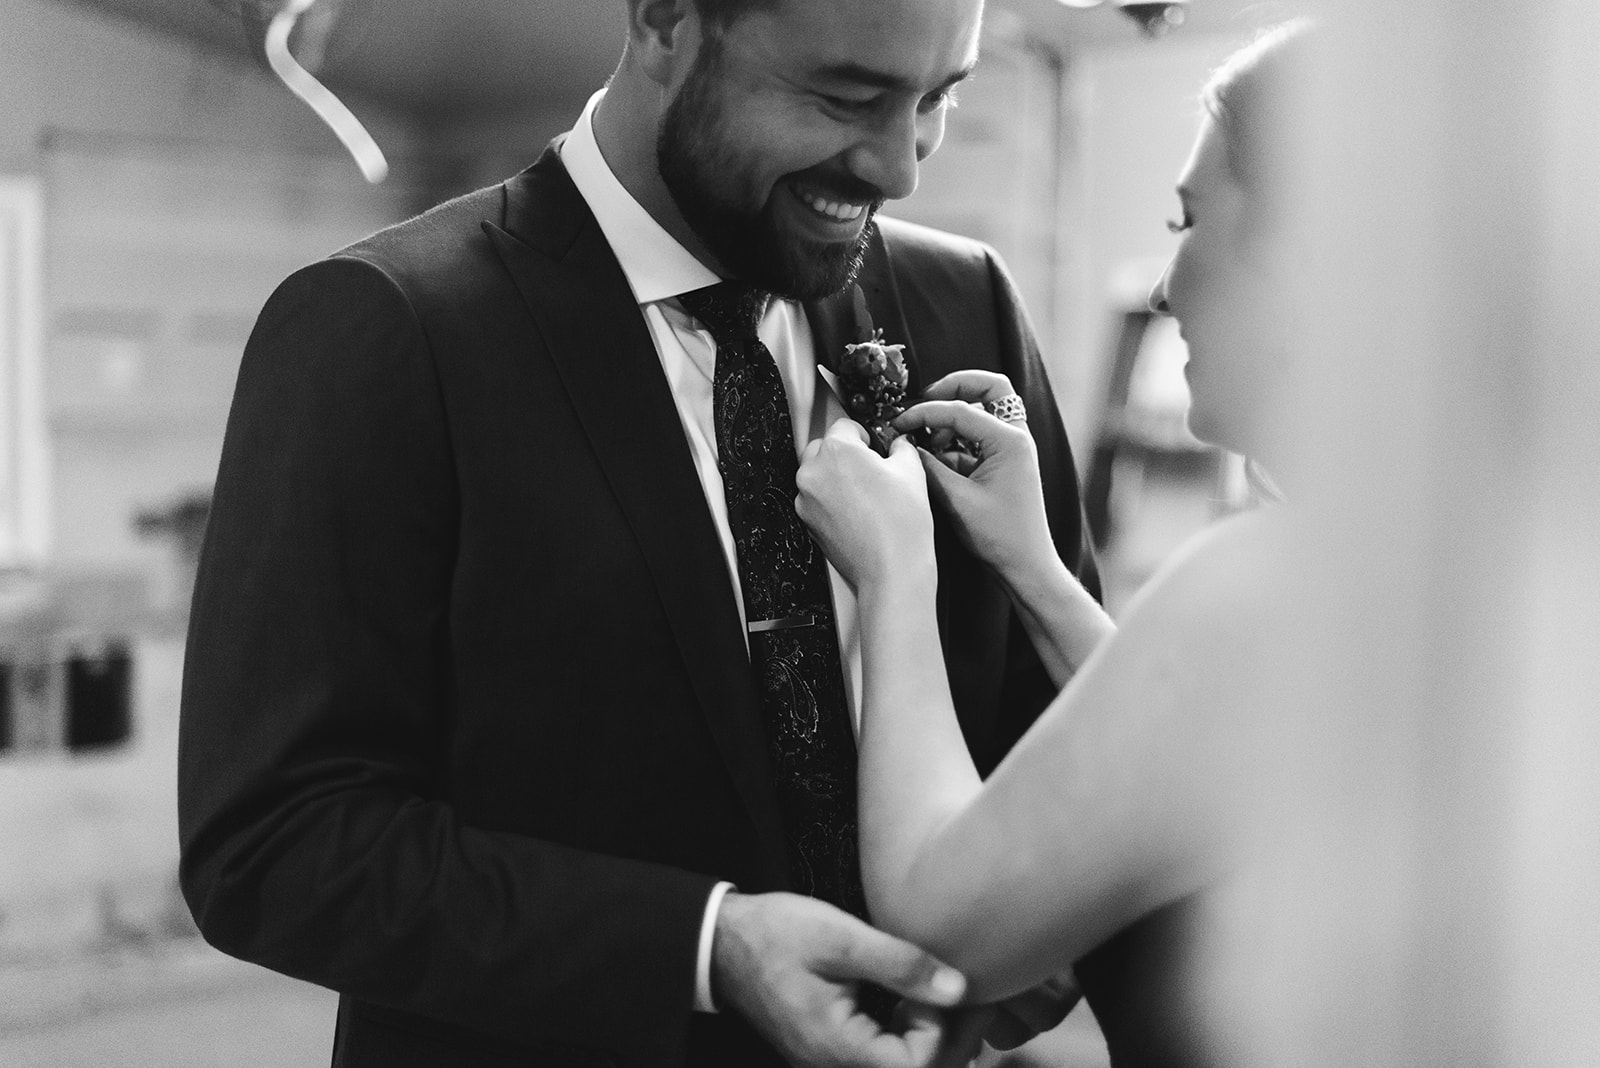 Bride helping groom with his boutonniere